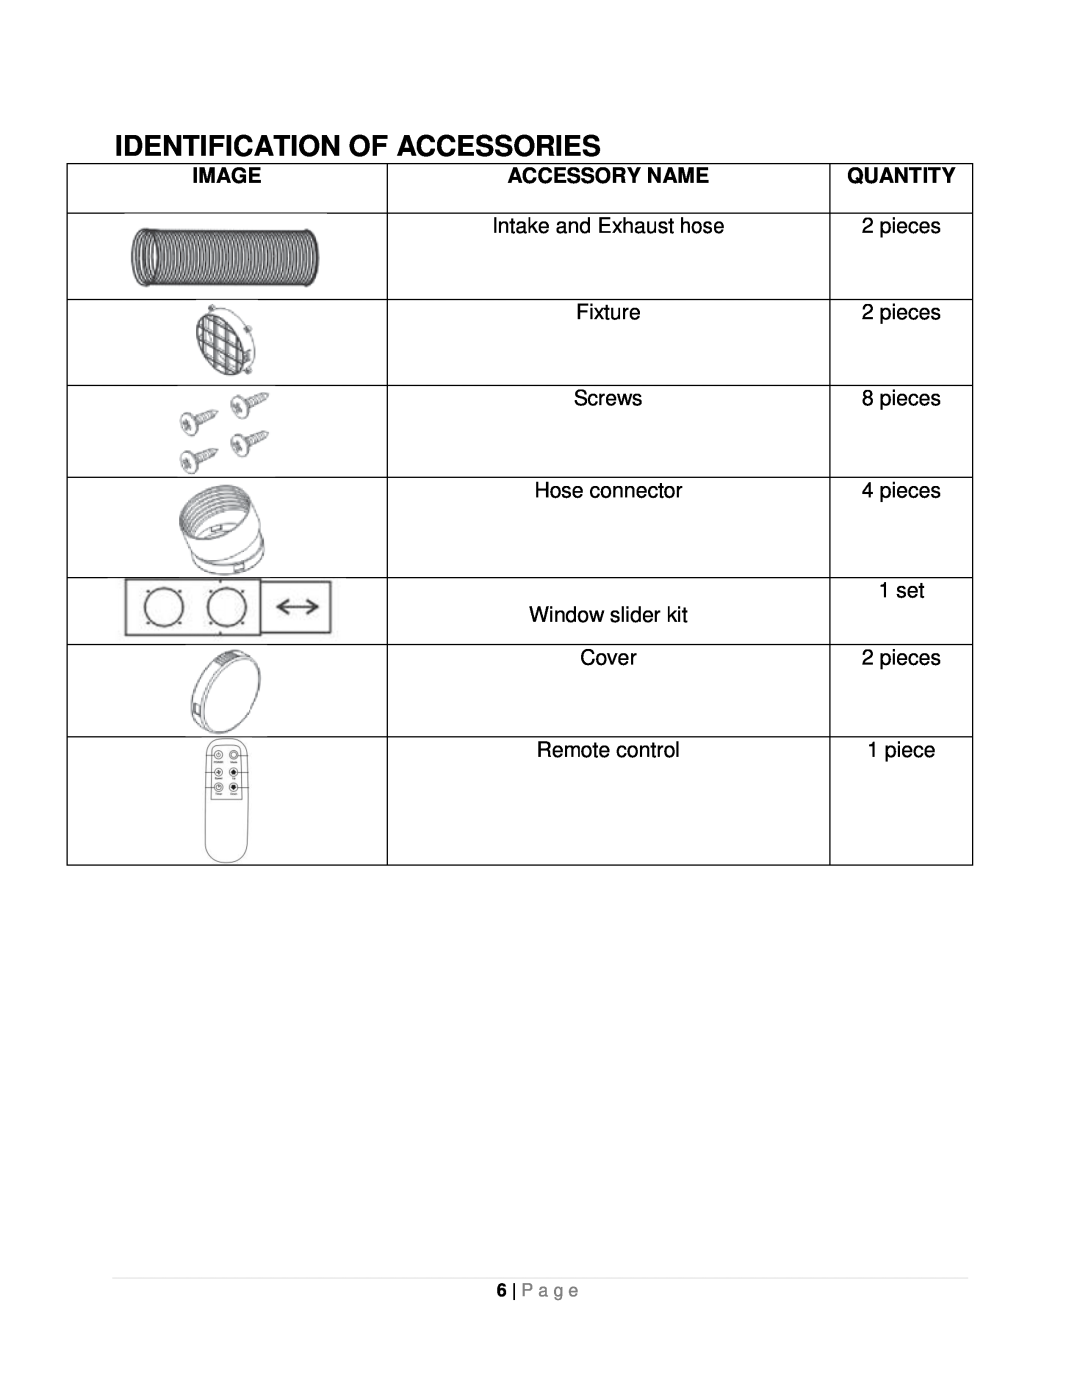 Whynter ARC-12SDH instruction manual Identification Of Accessories, Image, Accessory Name, Quantity 